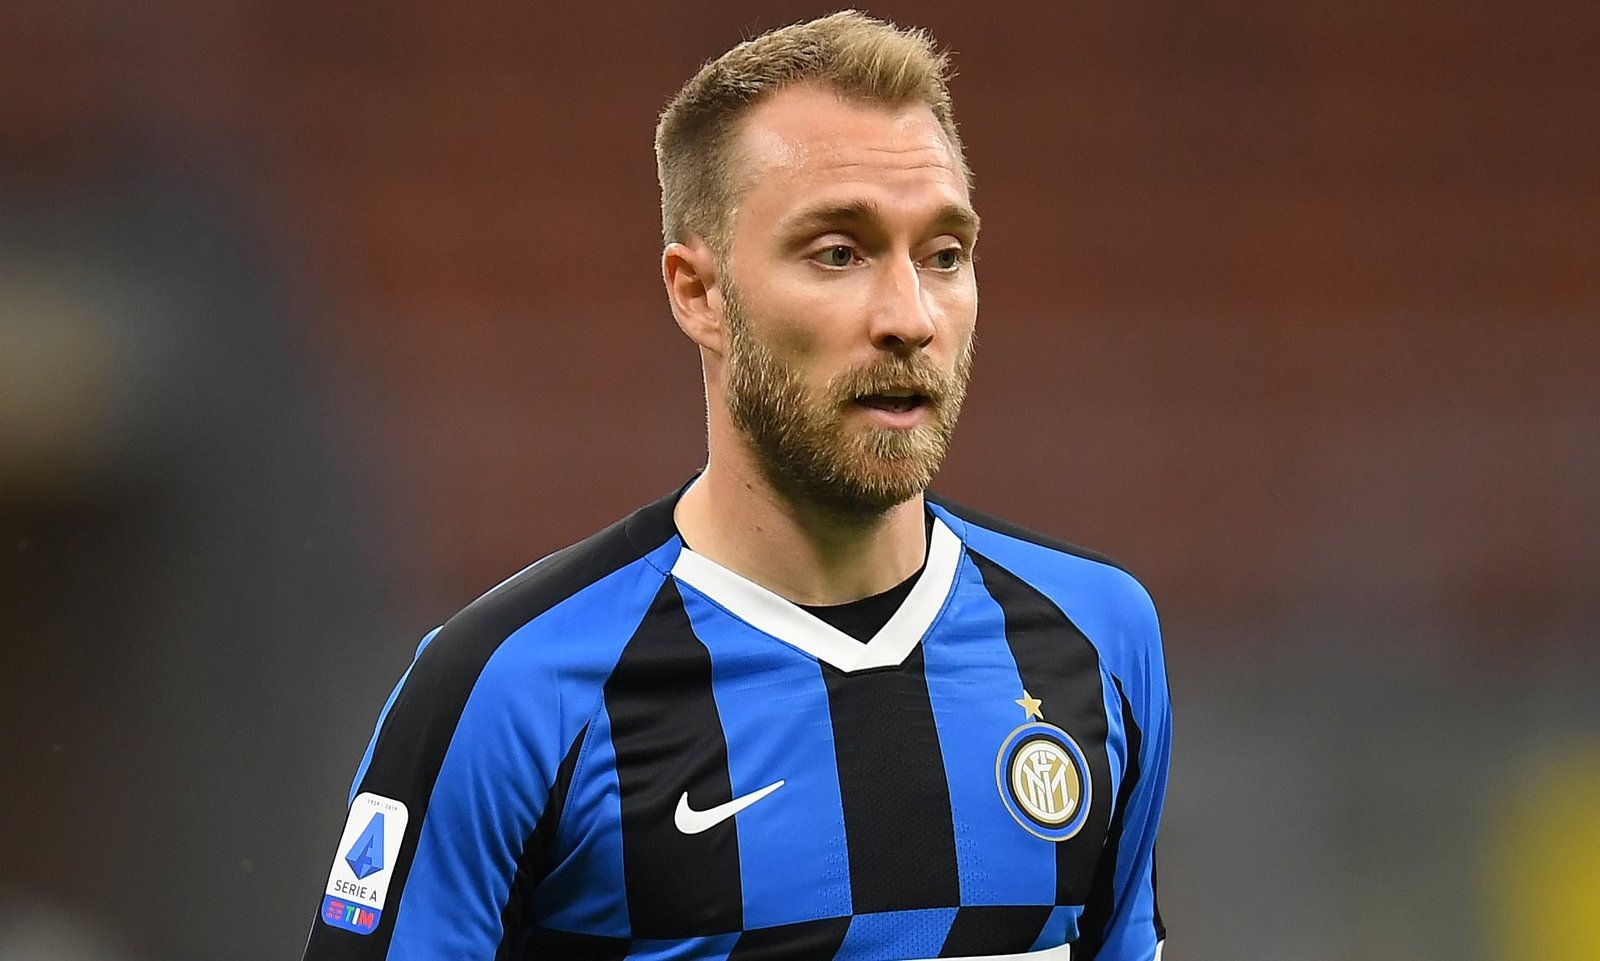 "Unwanted" Christian Eriksen seeks move away from Inter - Sports Leo